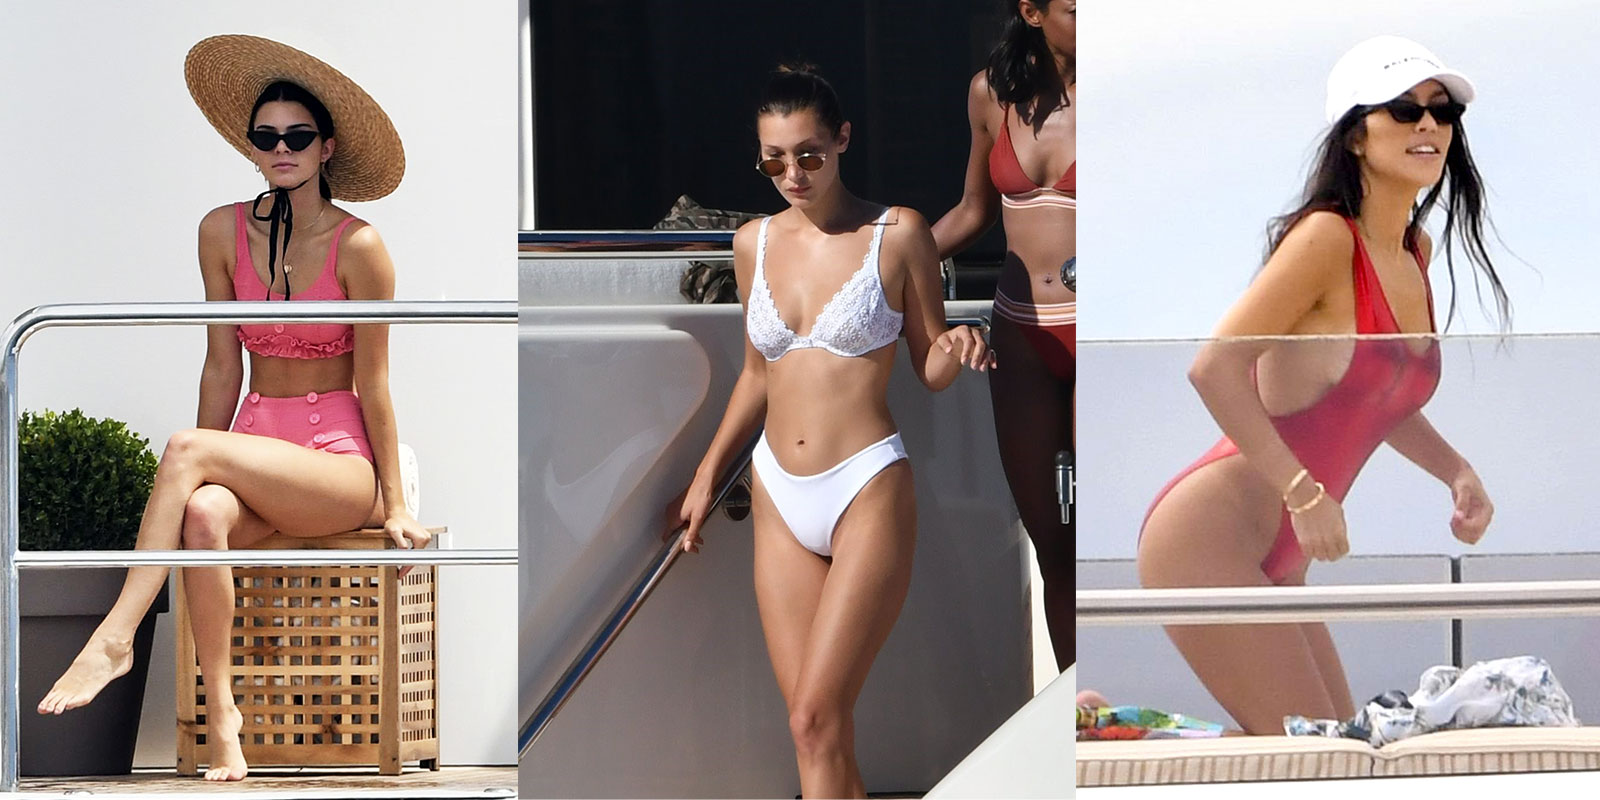 Summer swimwear trends to try include high-waist bikinis, white swimsuits and backless one-piece styles.